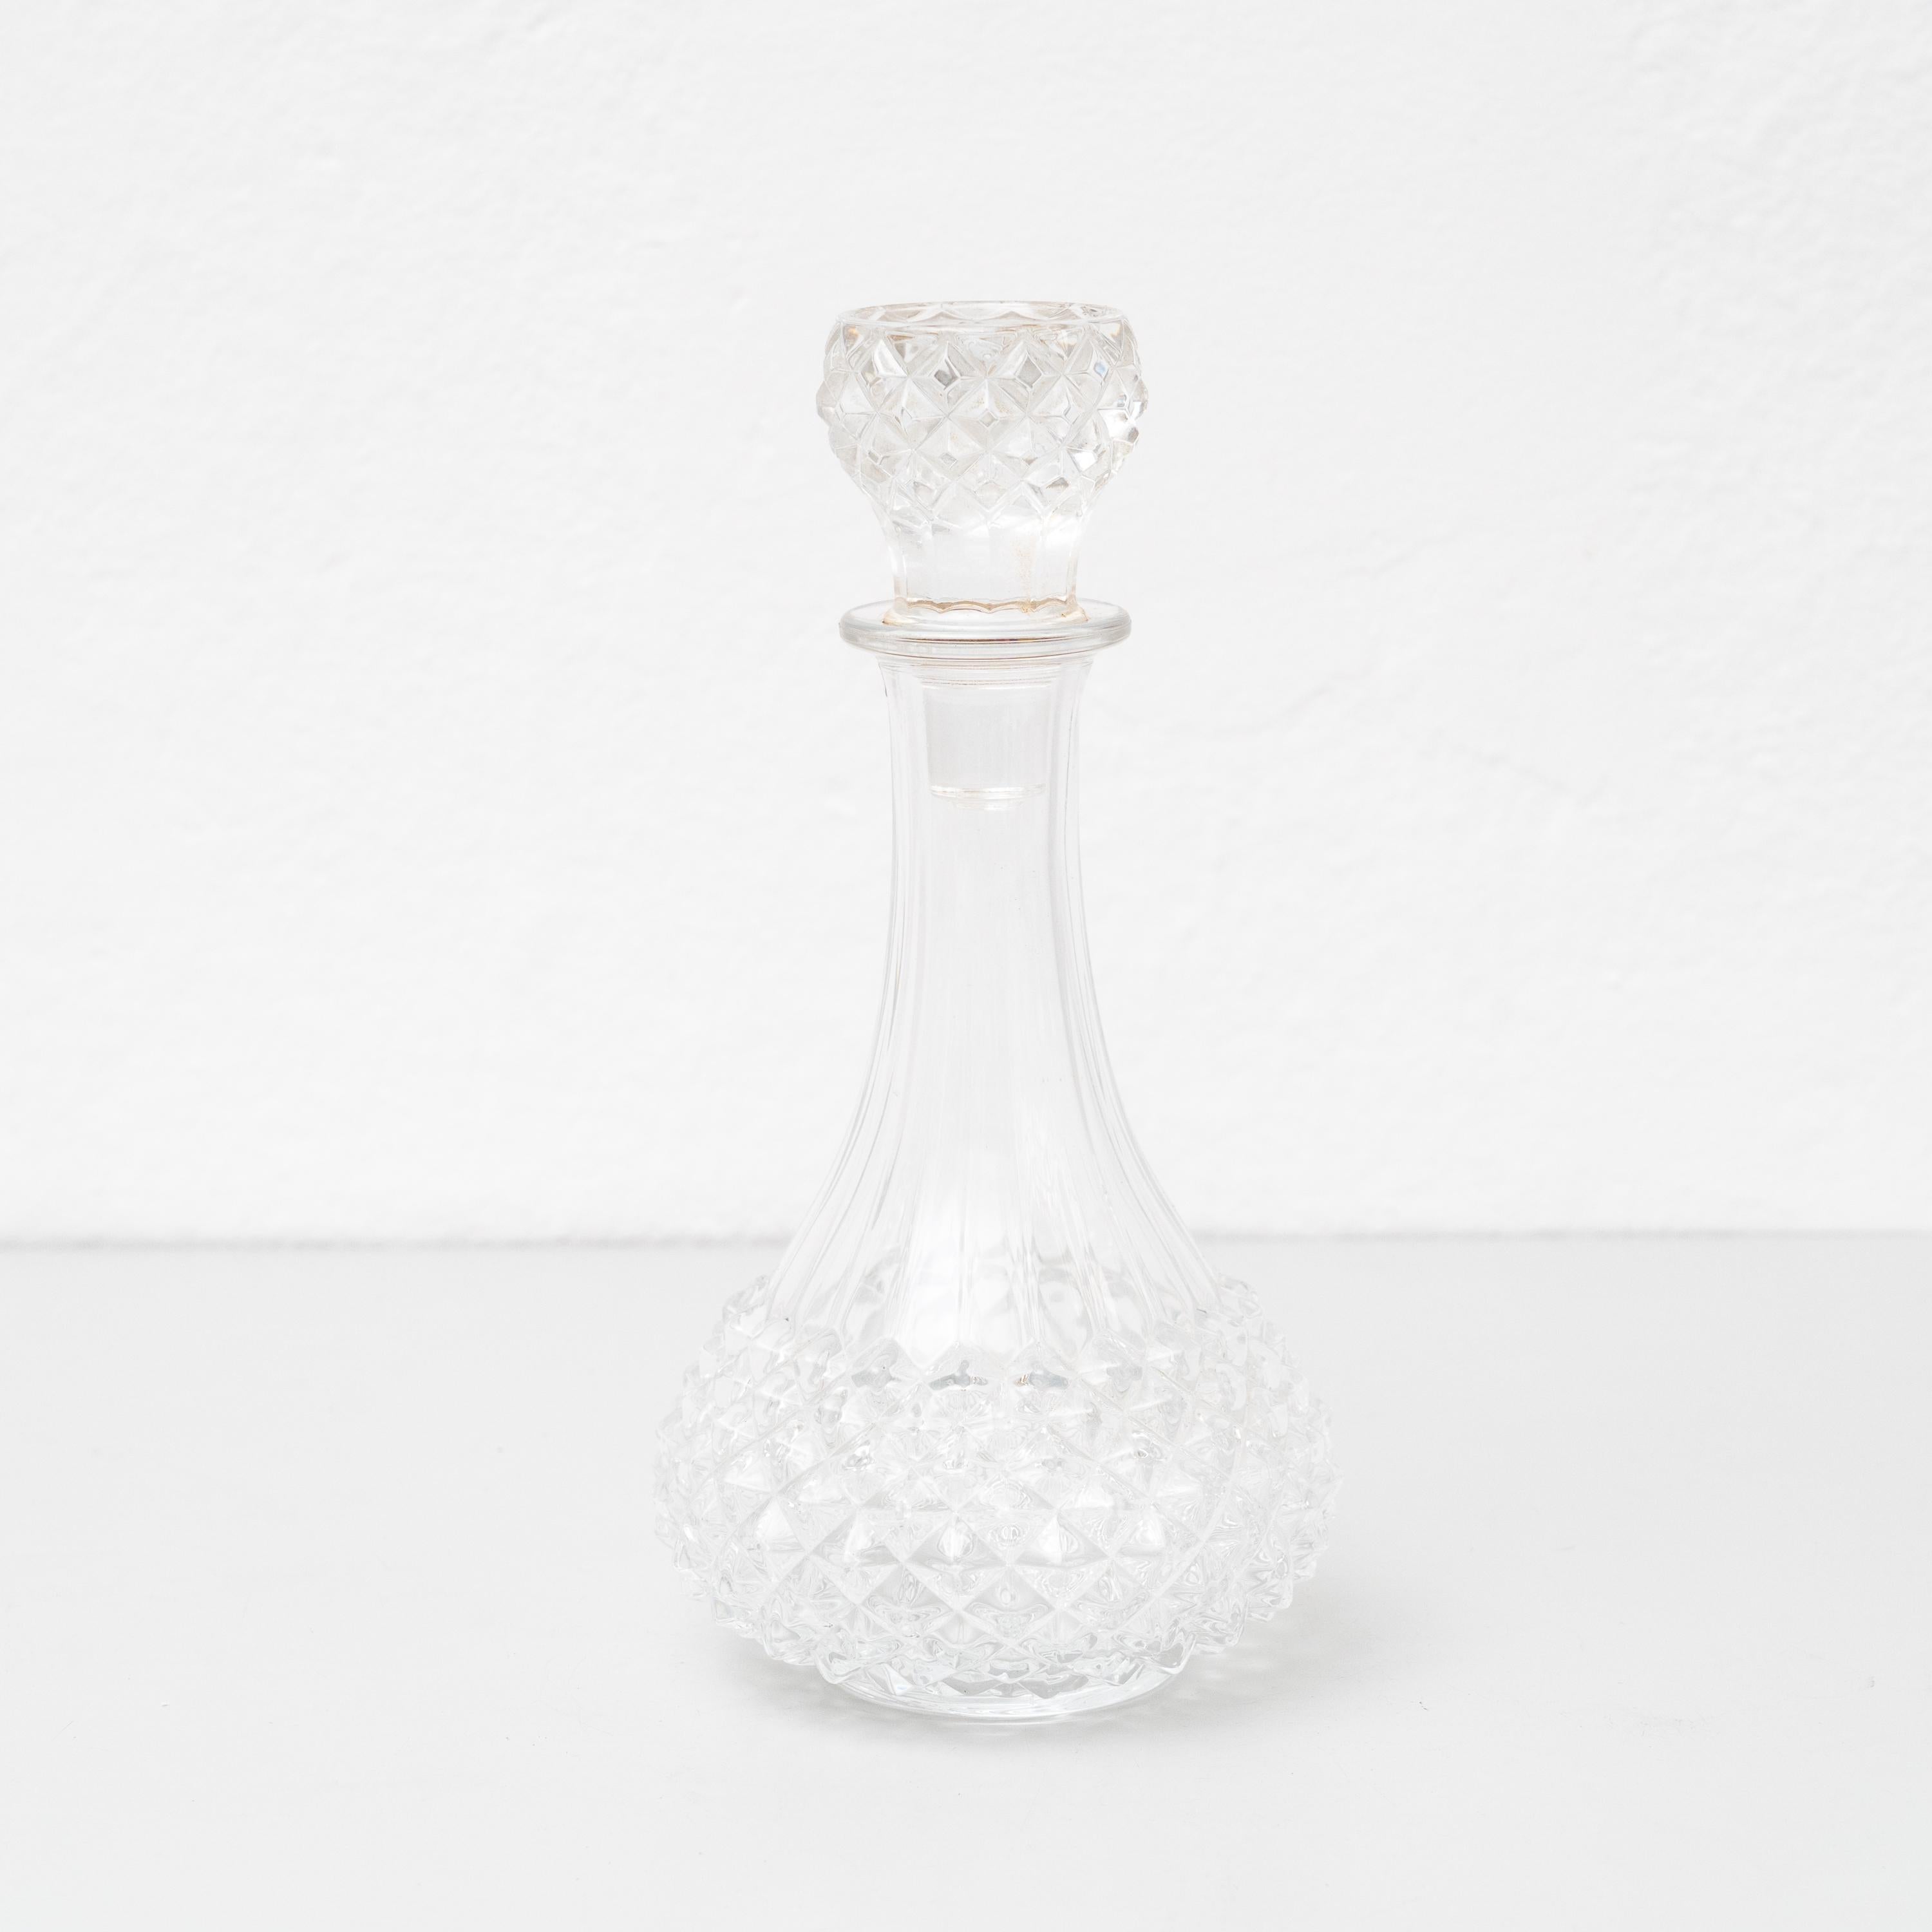  Vintage Glass Vase with Diamond Capped Style, Circa 1930  In Good Condition For Sale In Barcelona, Barcelona